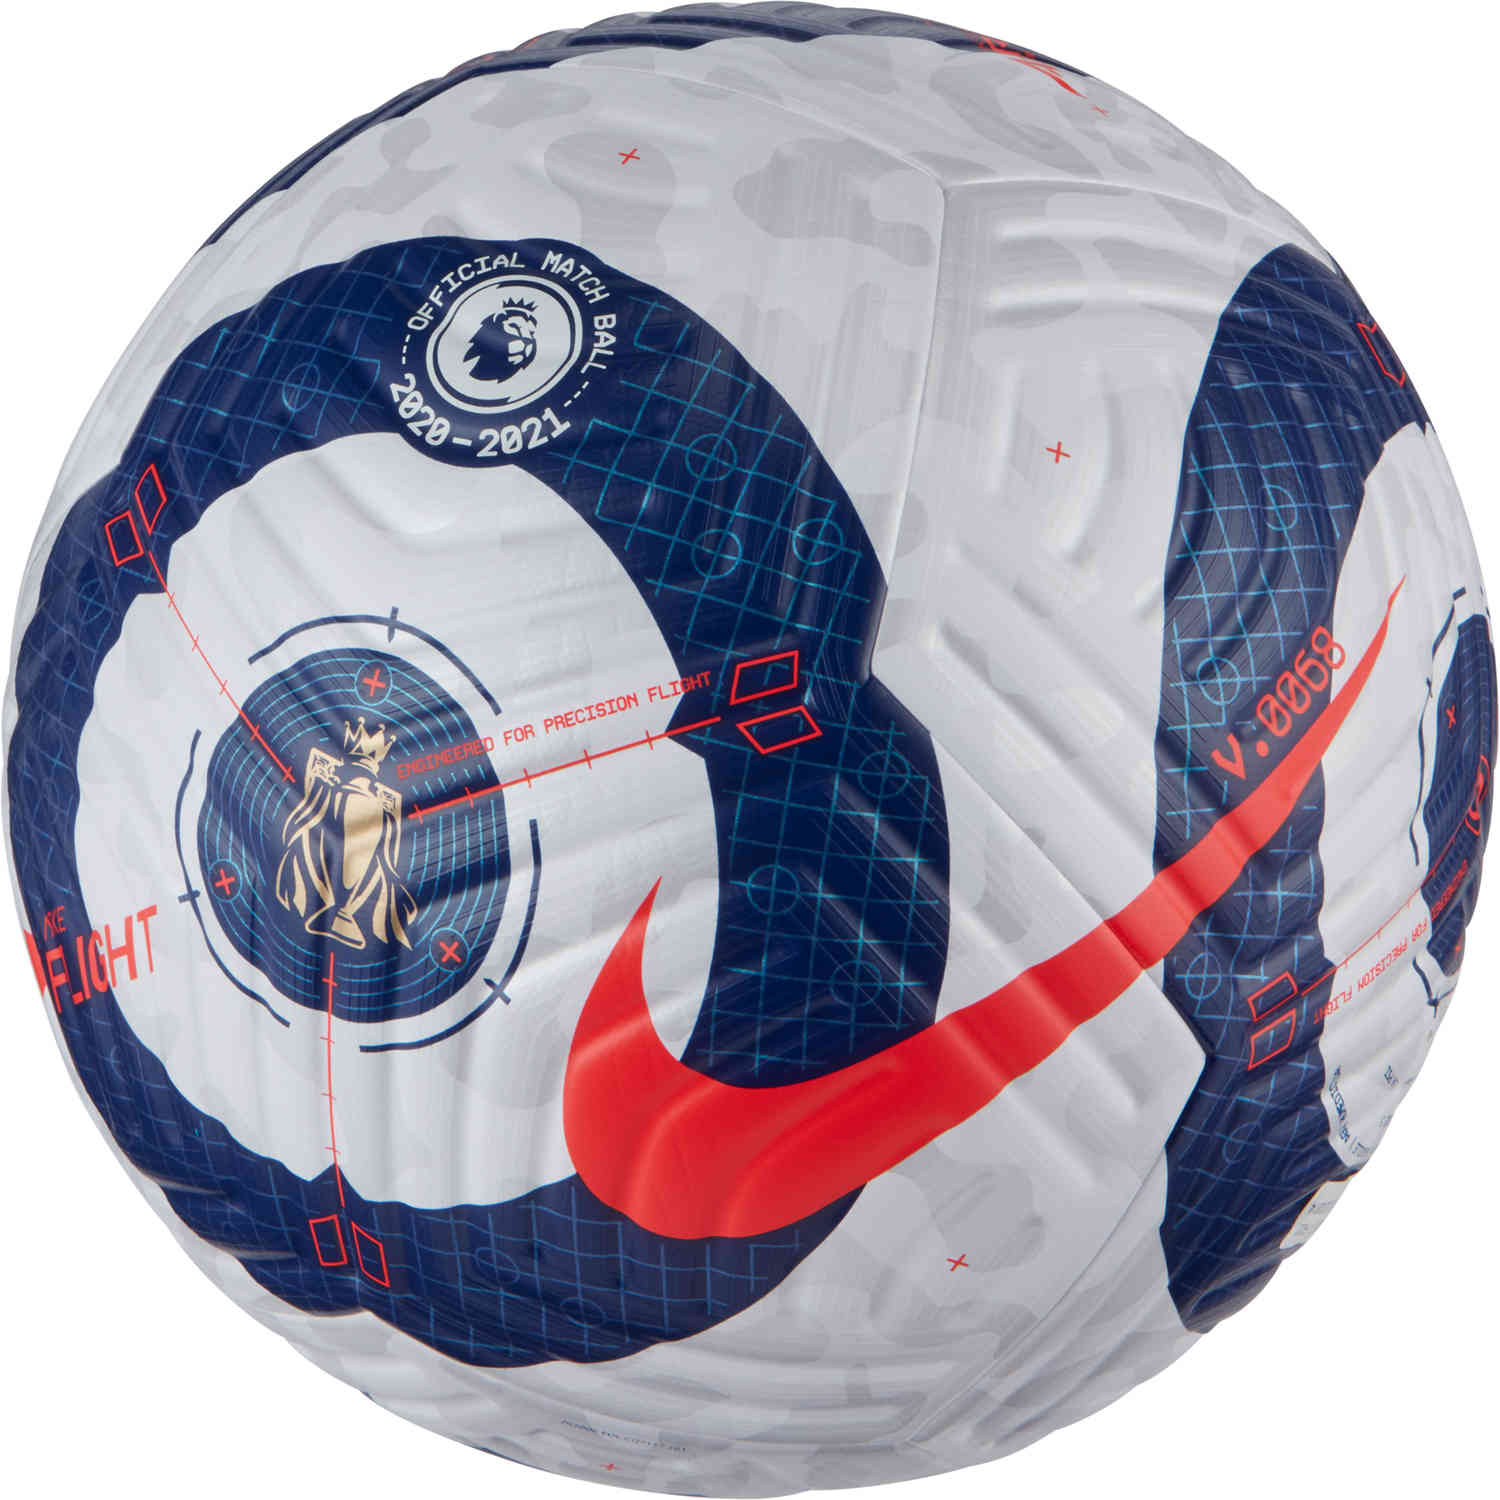 Nike Premier League Flight Official Match Soccer Ball White And Blue